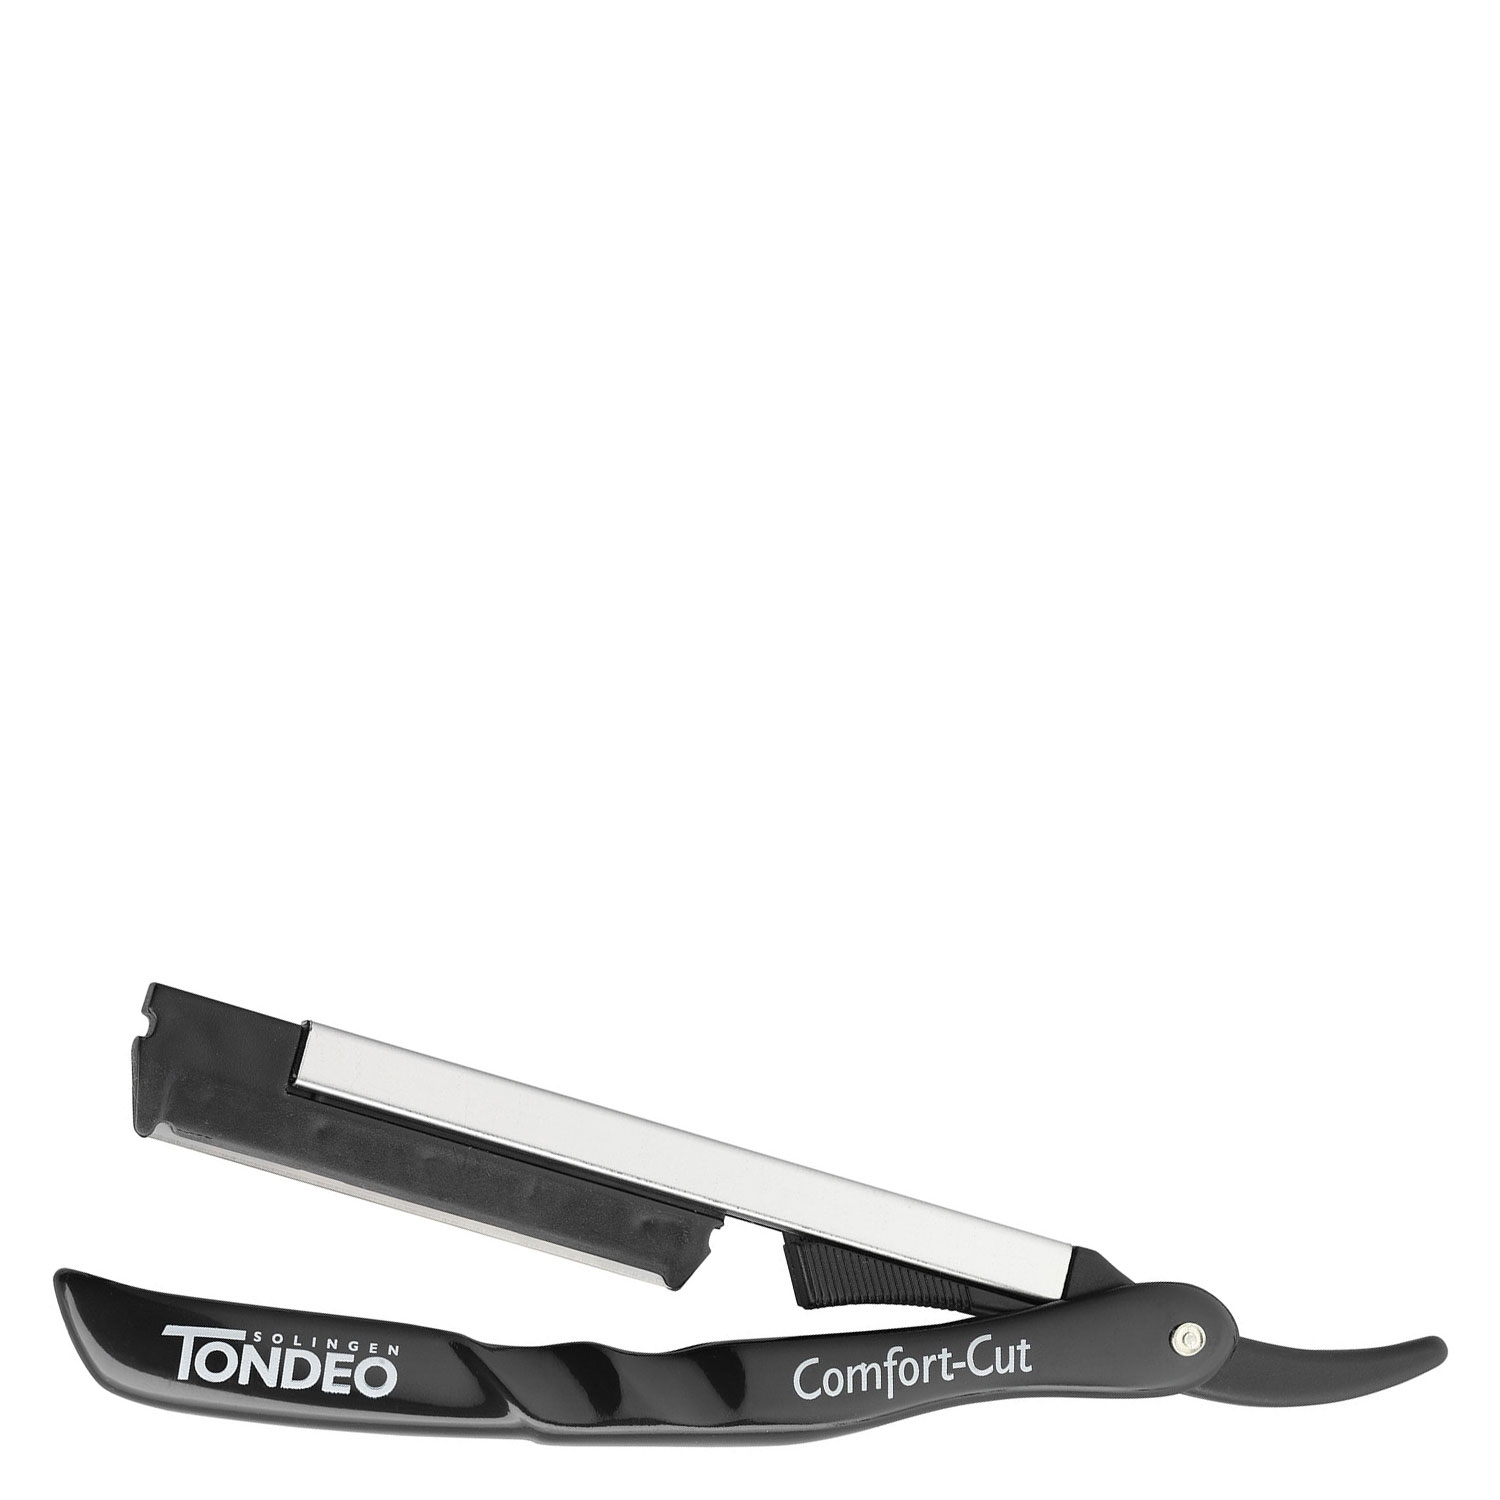 Product image from Tondeo Razor - Comfort Cut Set